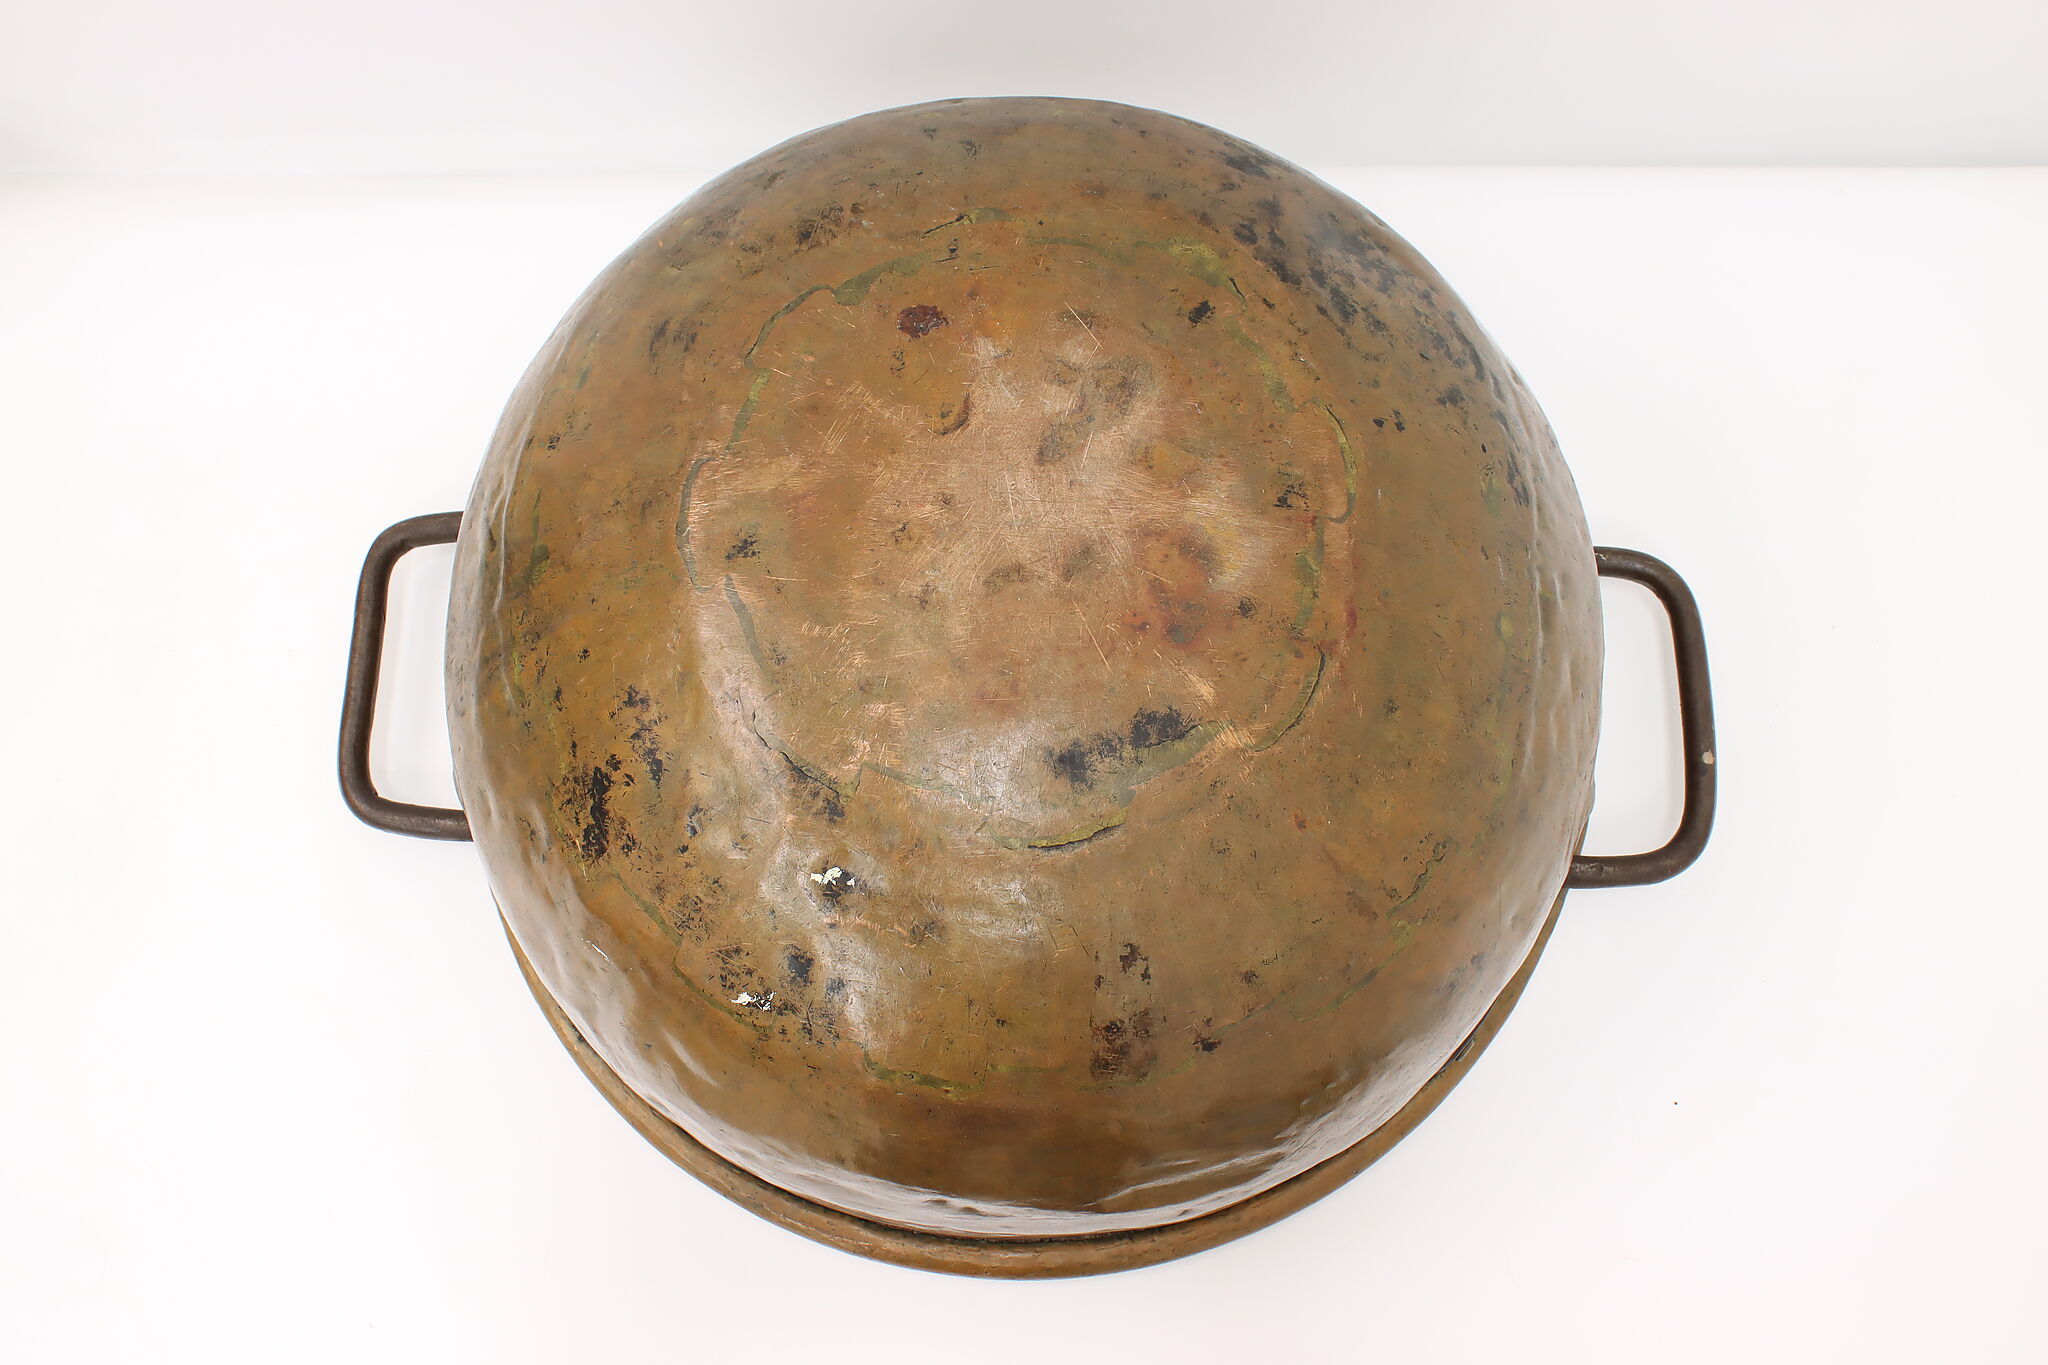 Sold at Auction: Pittsburg Pennsylvania copper candy kettle